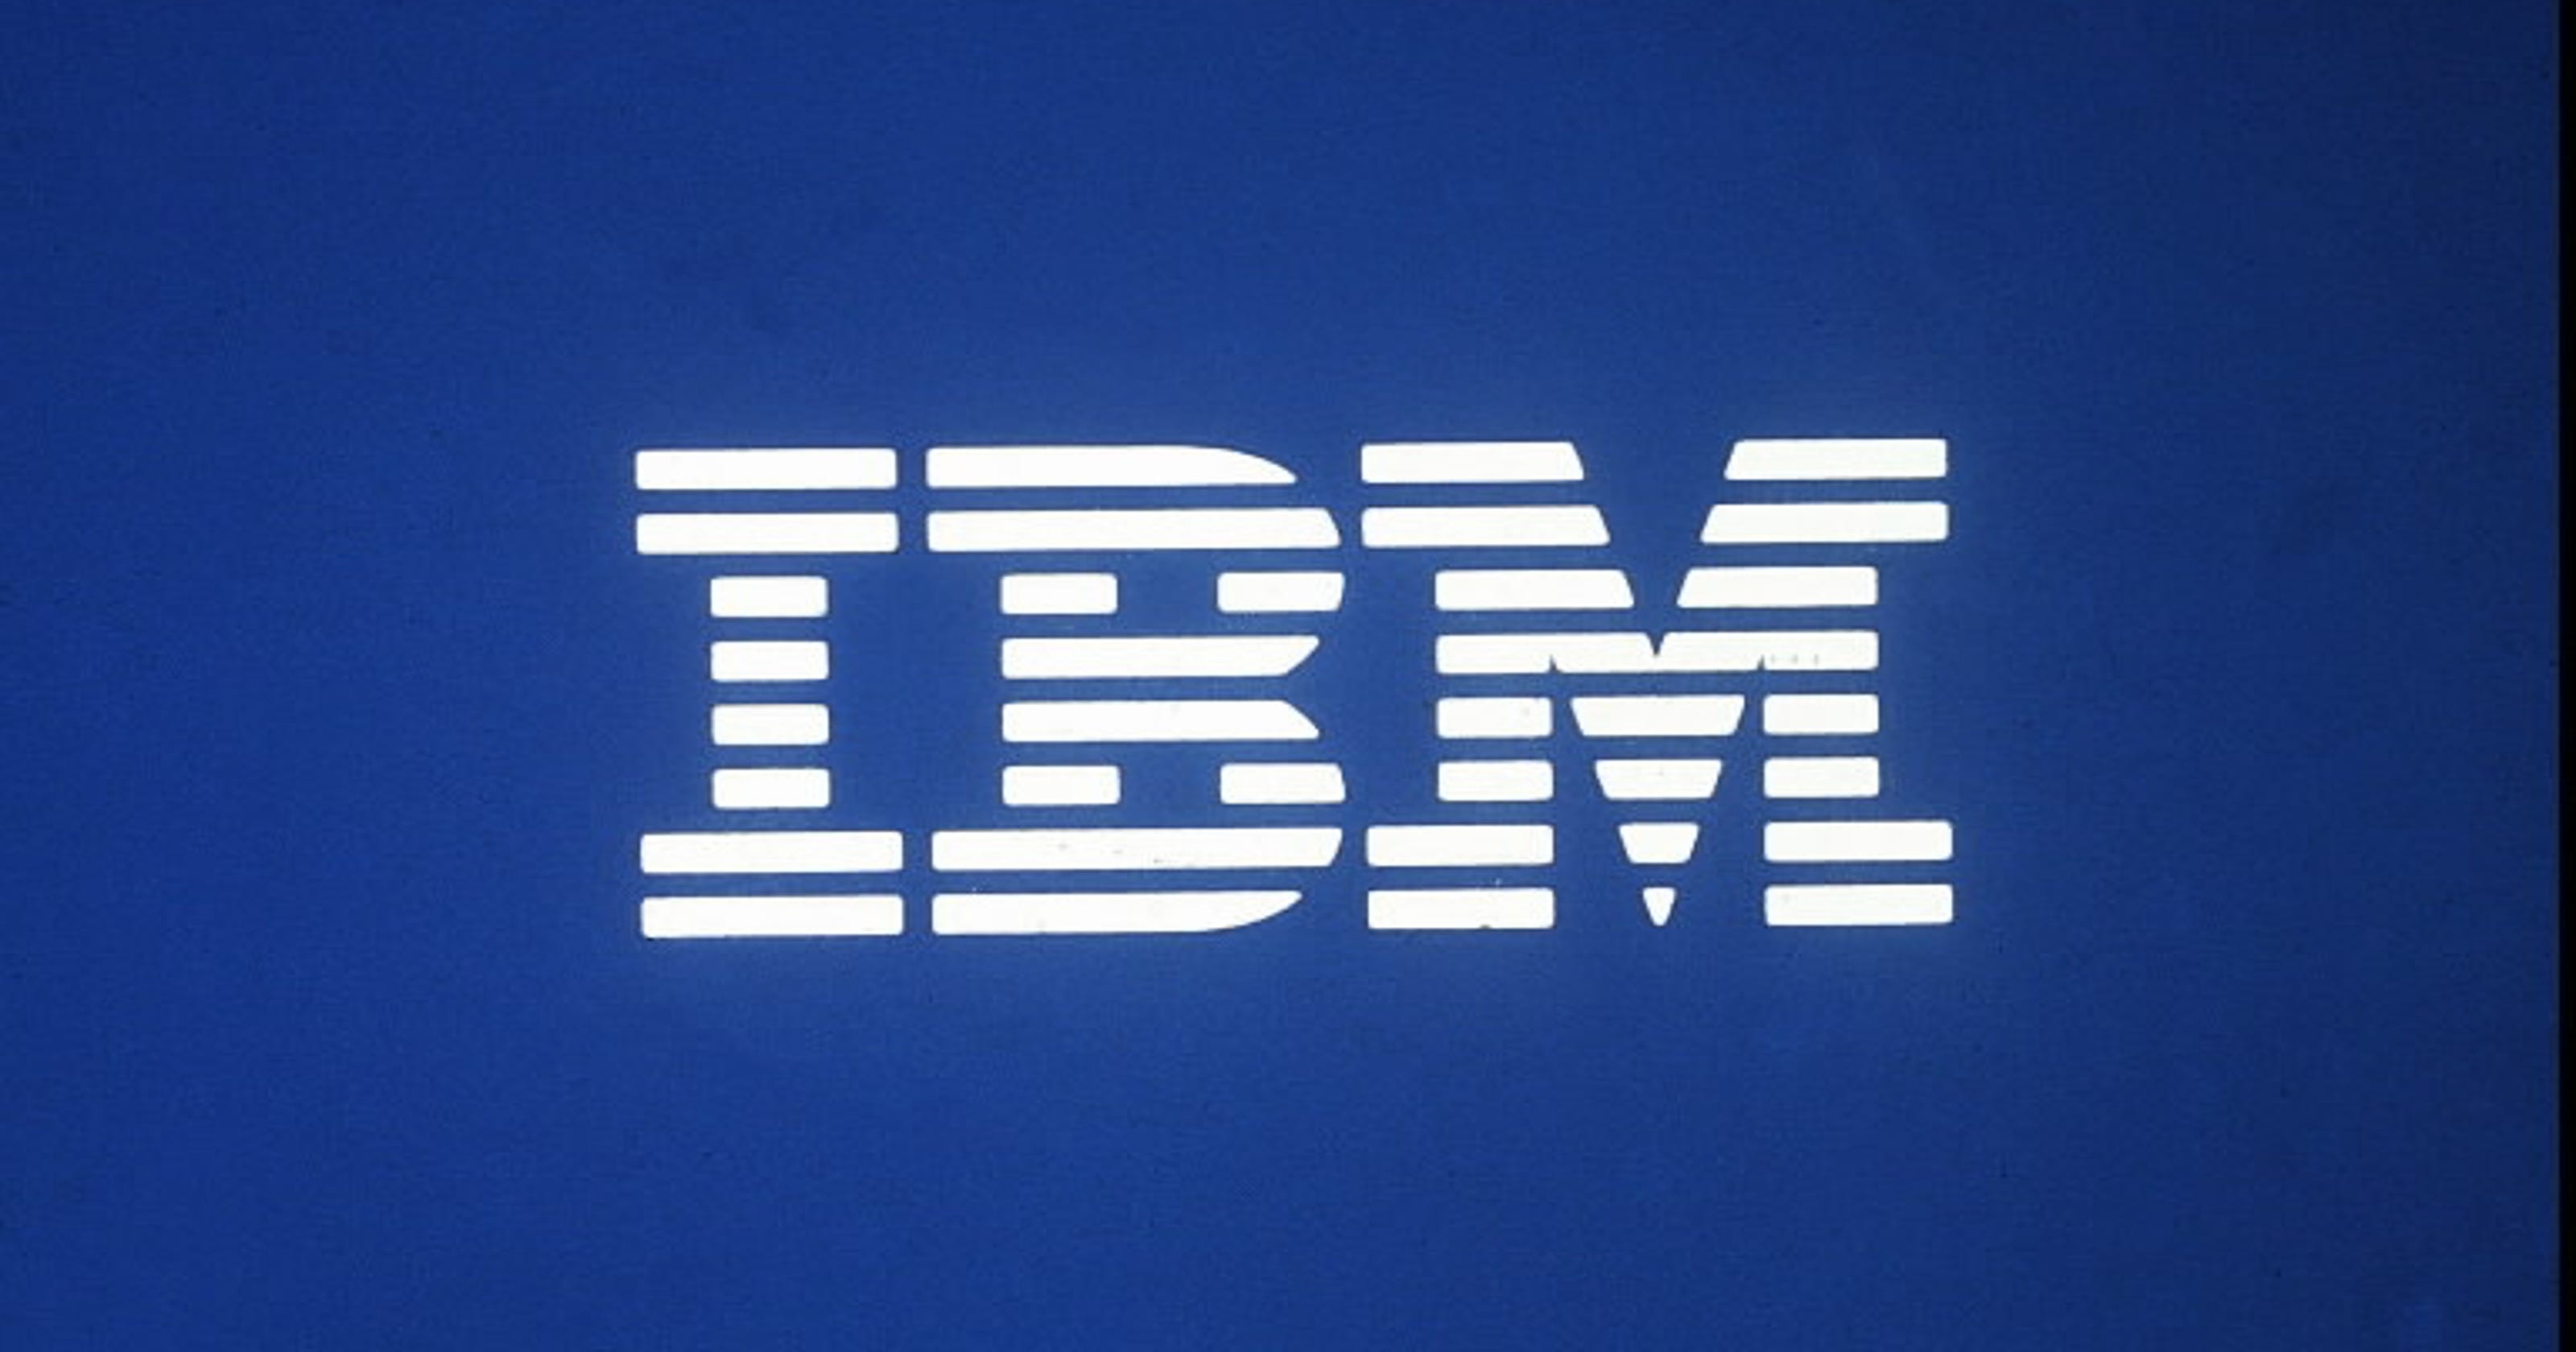 IBM CEO, other top execs give up 2013 bonuses